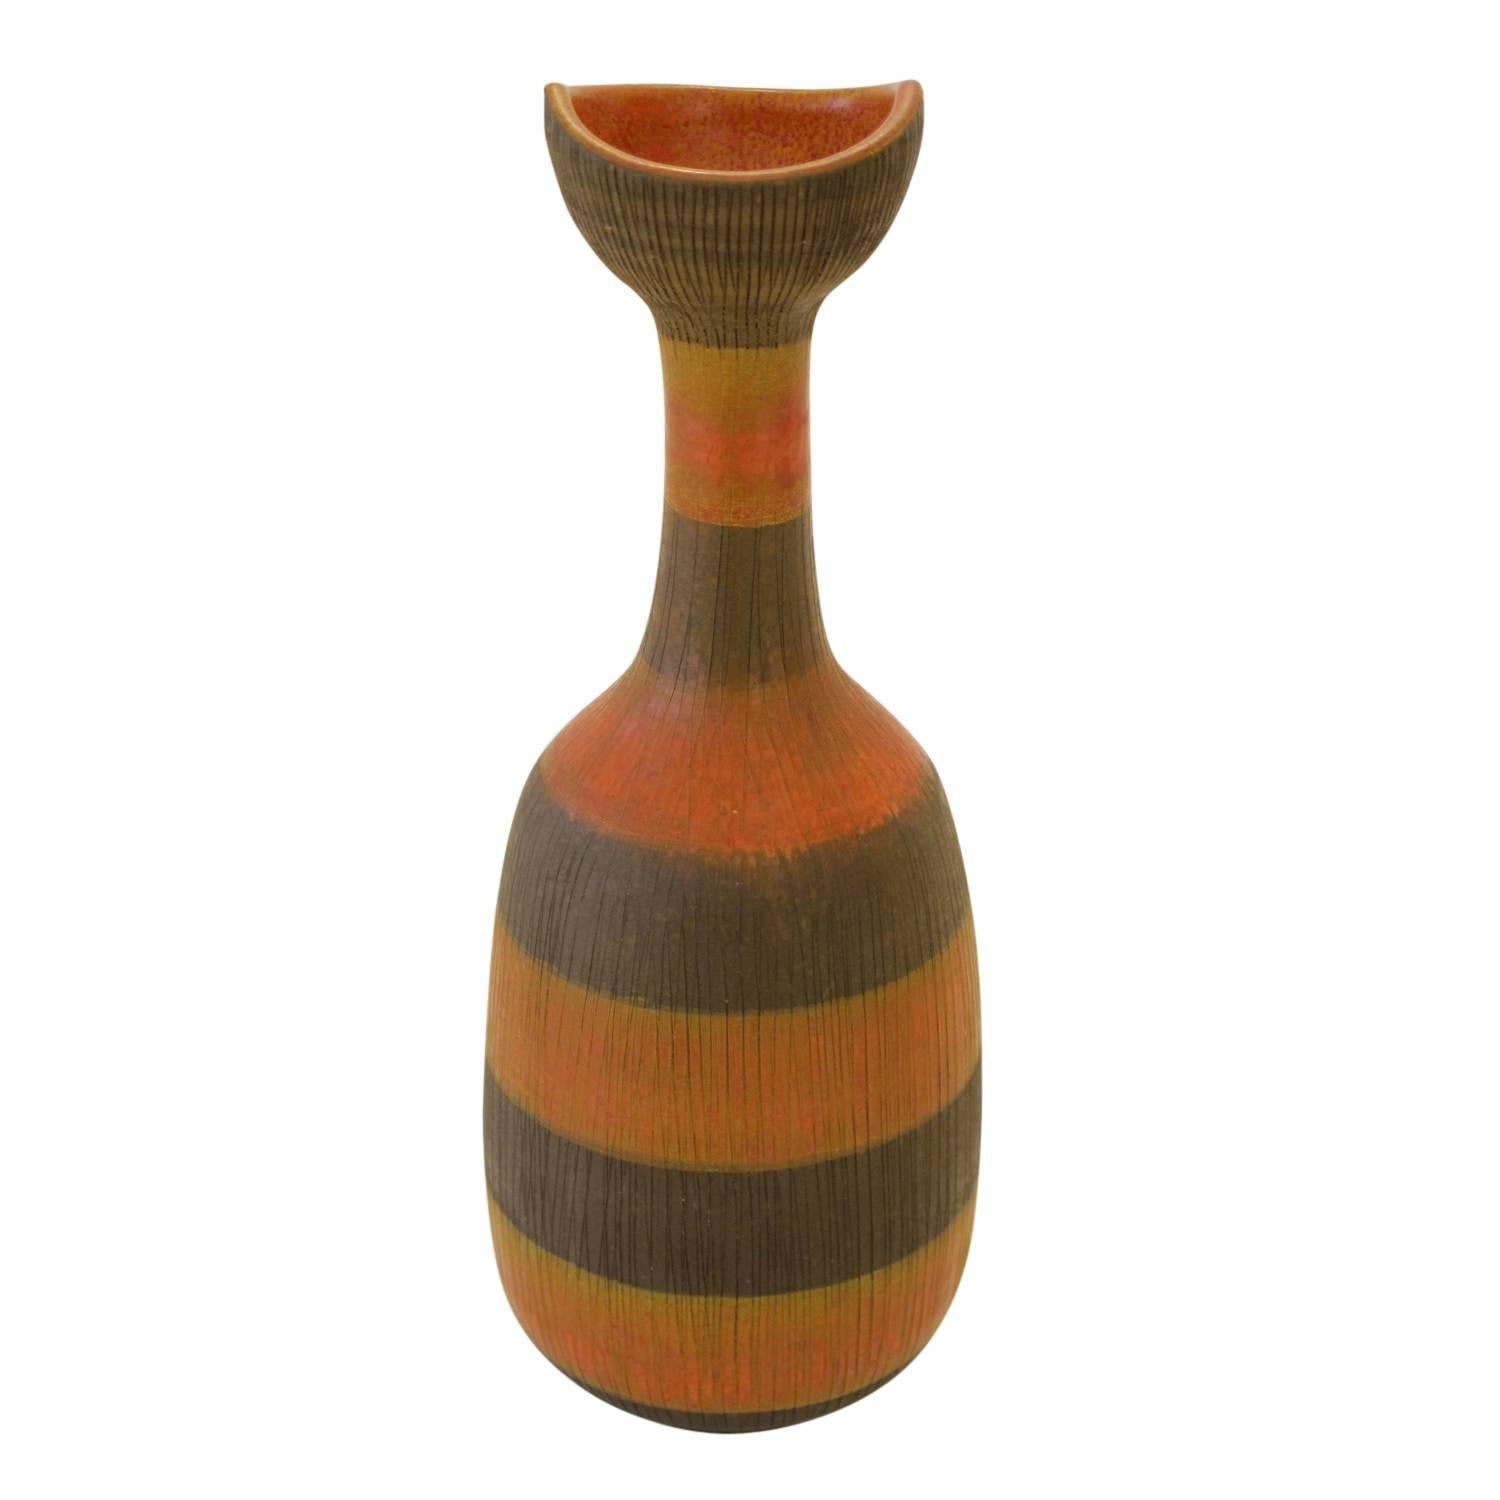 Bitossi for Raymor Incised Seta Ceramic Vase Italy 1950's. Alternating lobster orange and brown glaze with incised texture.